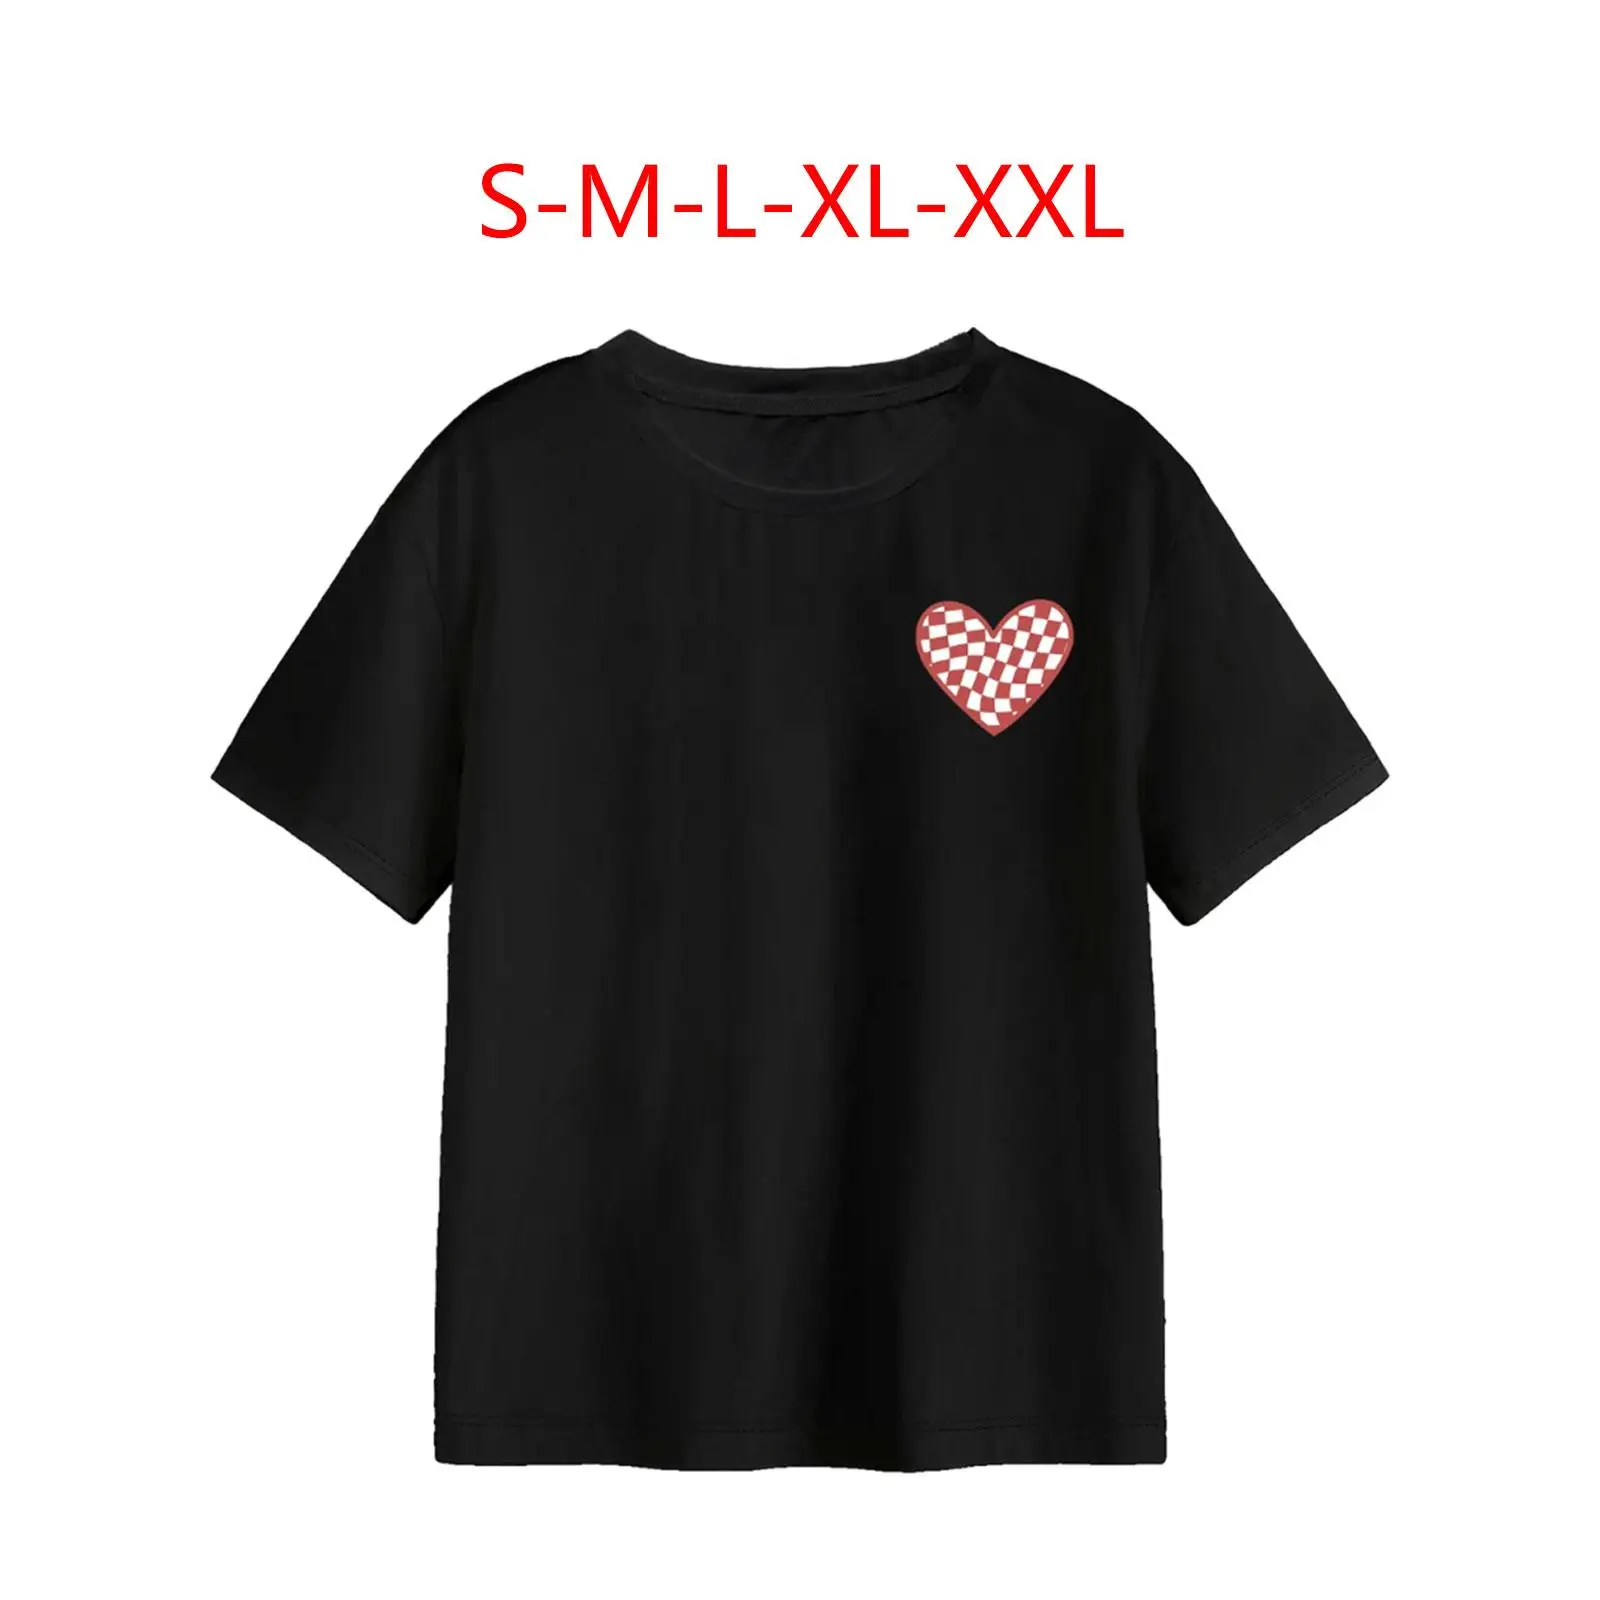 Women`s T Shirt Activewear Outfits Short Sleeve Top Crewneck Trendy Basic Tee for Daily Wear Travel Walking Commuting Shopping